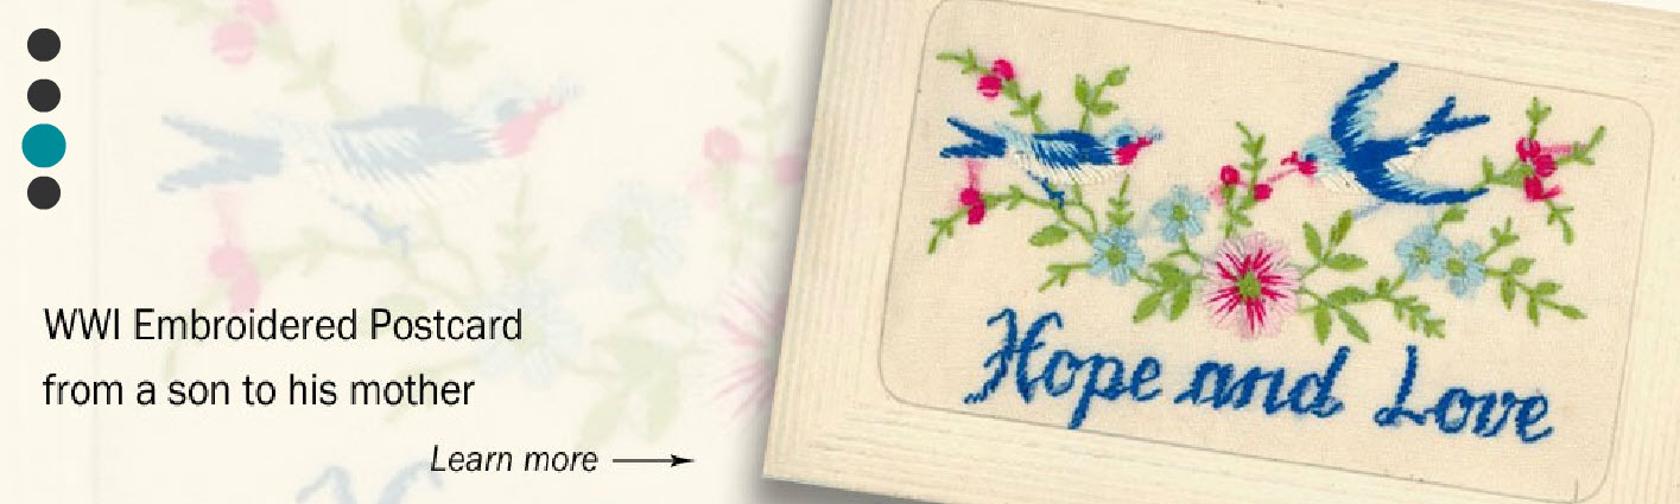 Embroidered postcard